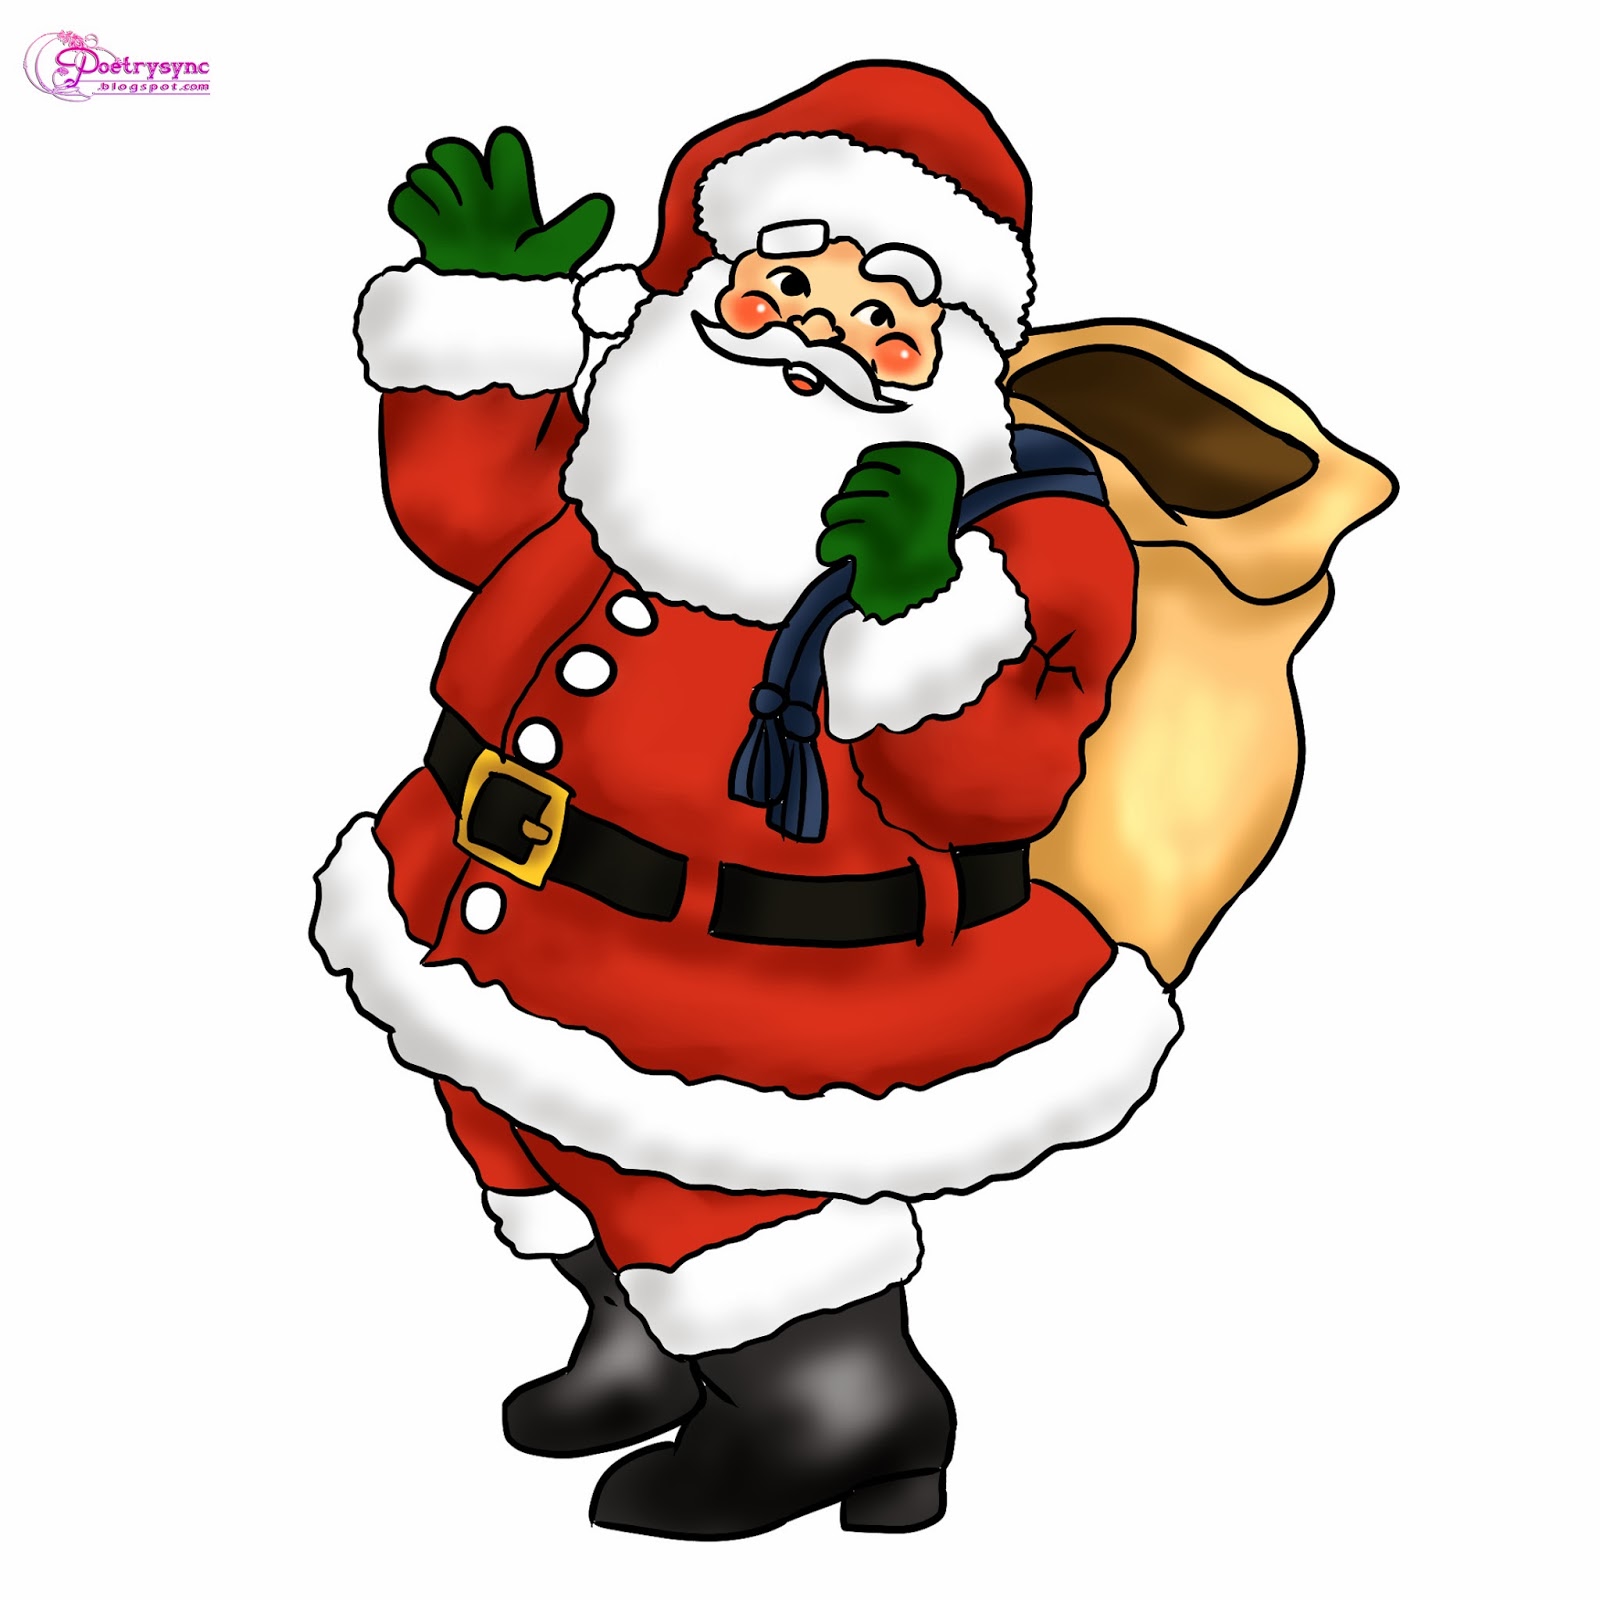 Santa Claus HD Clipart and Pictures for Christmas Festival